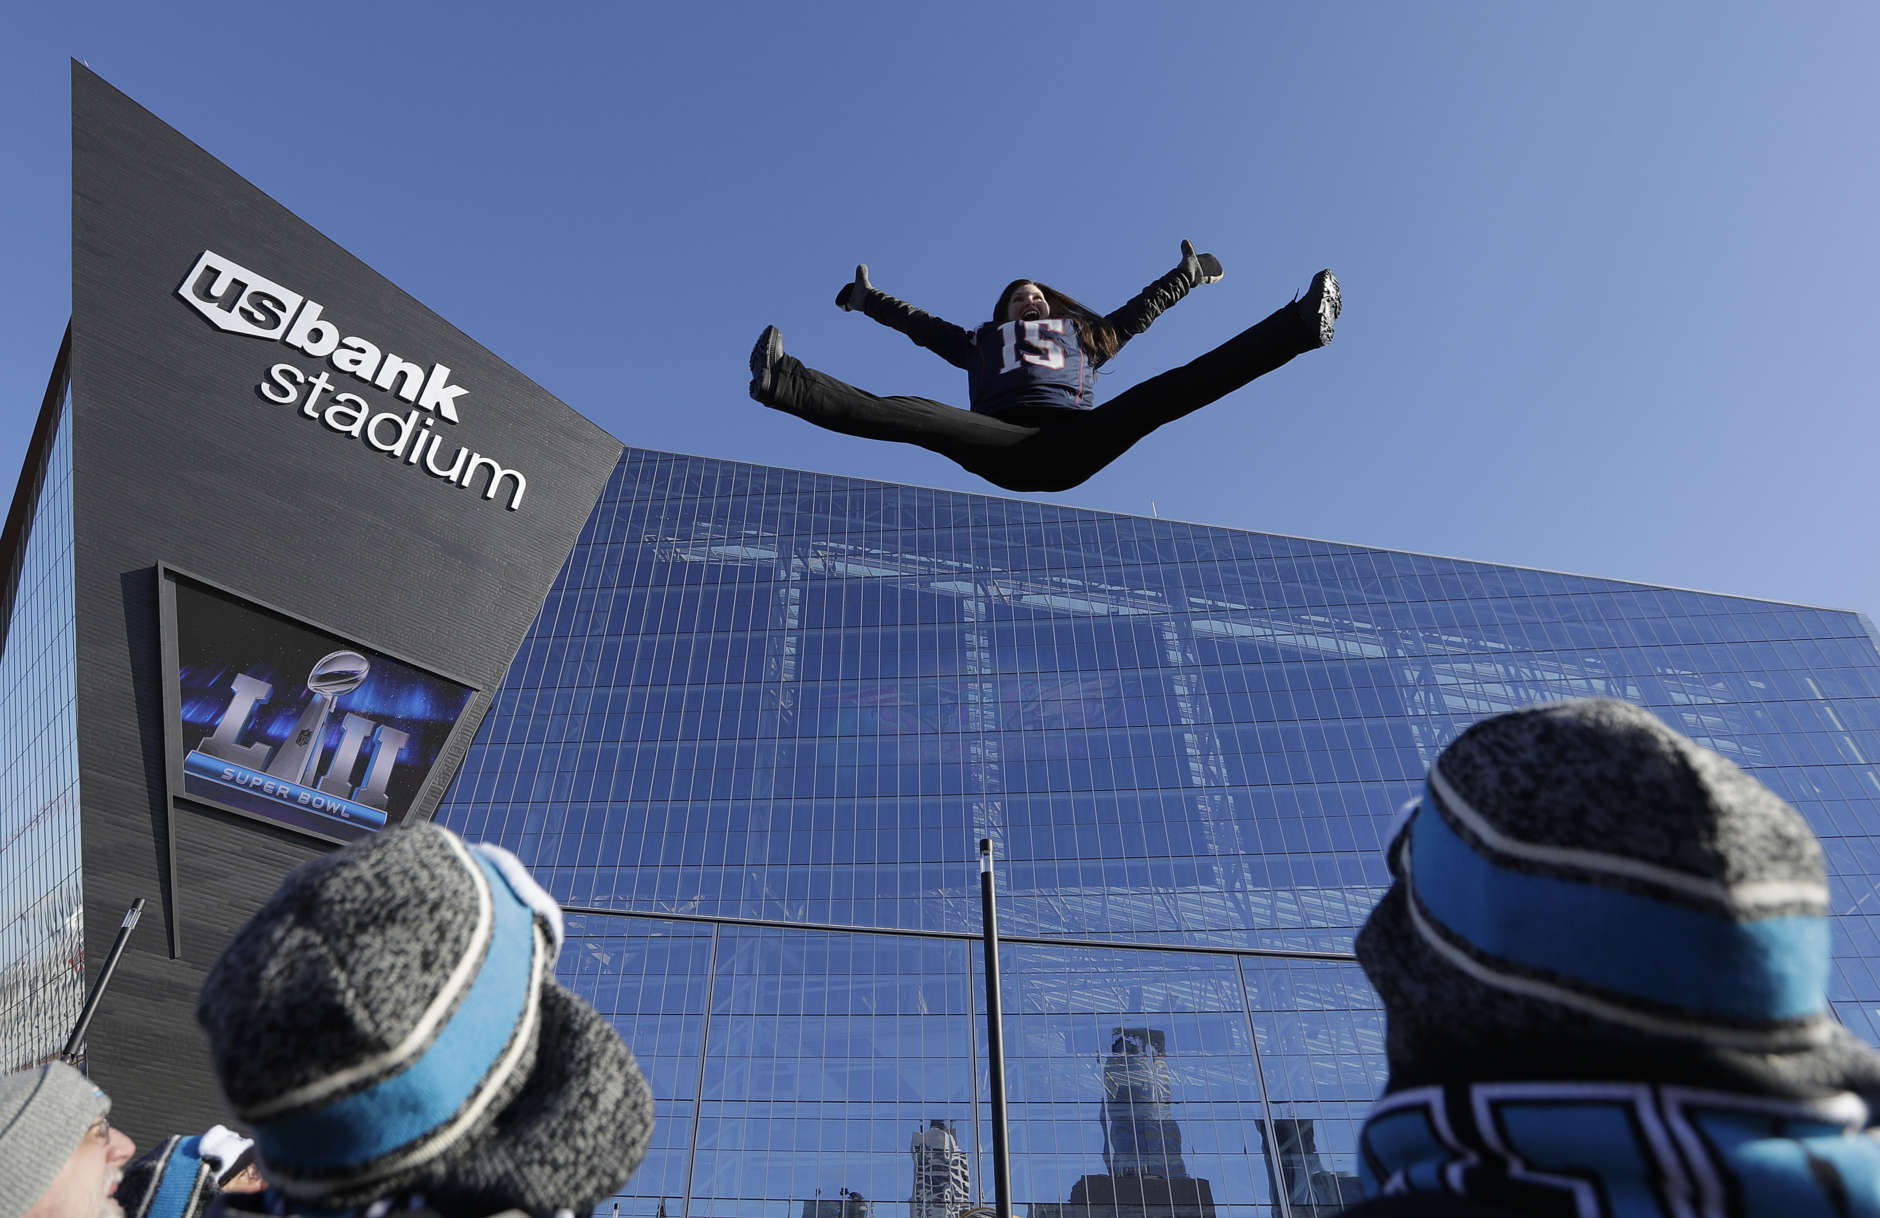 A fan jumps on a trampoline outside U.S. Bank Stadium before the NFL Super Bowl 52 football game between the Philadelphia Eagles and the New England Patriots Sunday, Feb. 4, 2018, in Minneapolis. (AP Photo/Eric Gay)